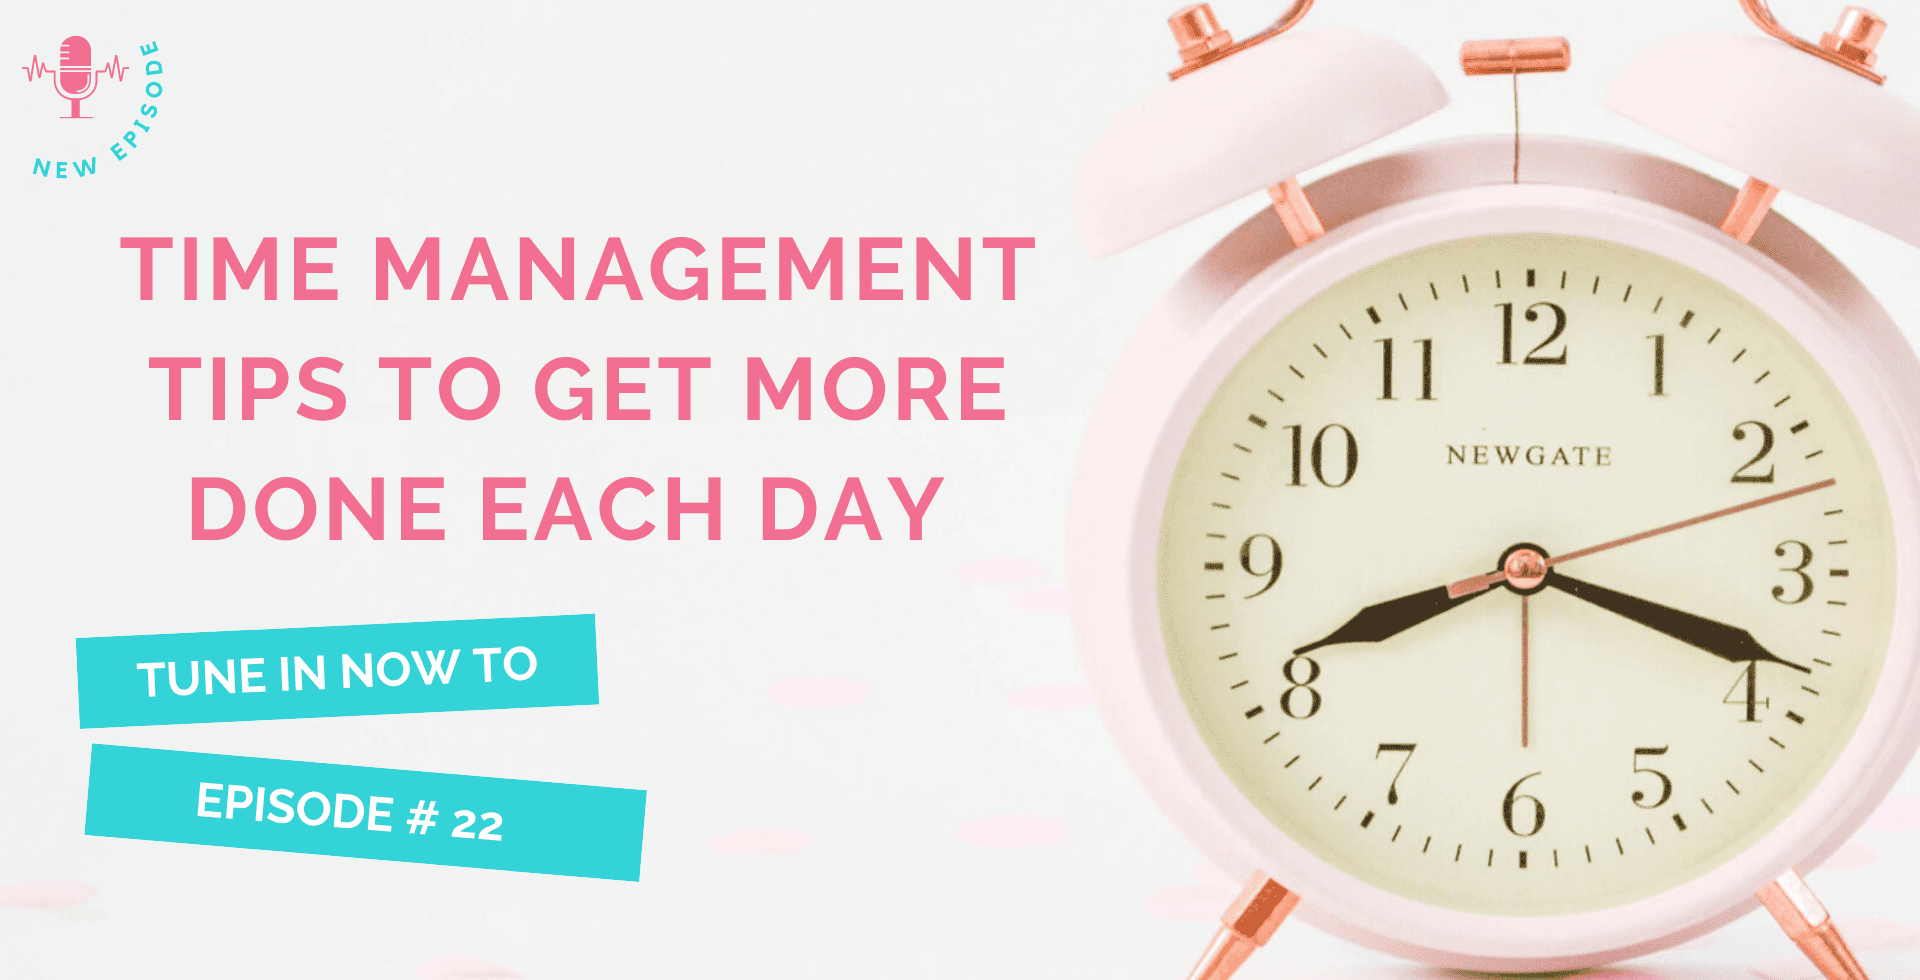 Time Management Tips to Get More Done Each Day featured blog post